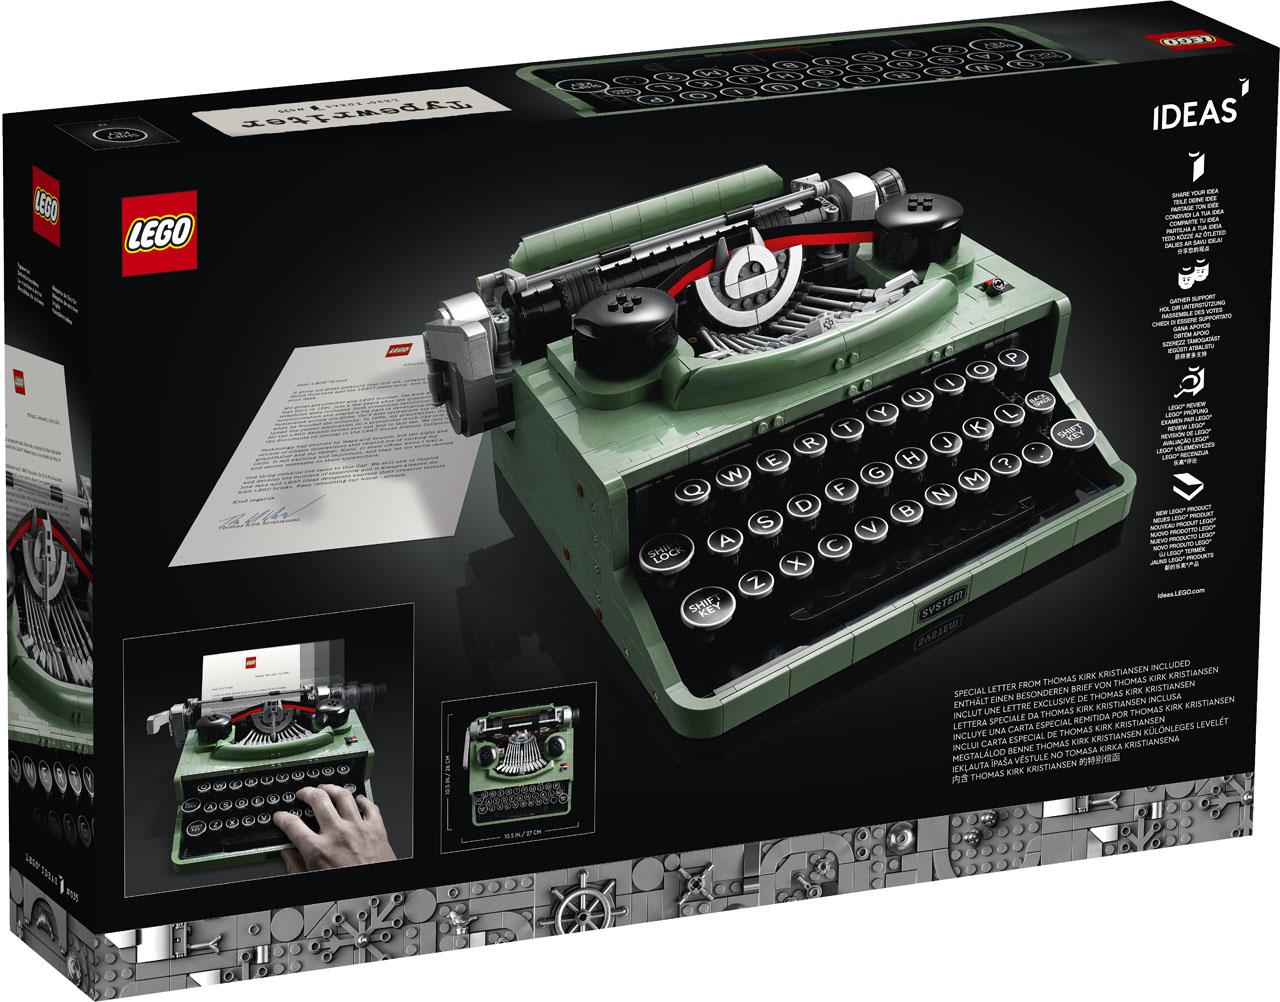 LEGO Ideas Typewriter (21327) Officially Announced - The Brick Fan